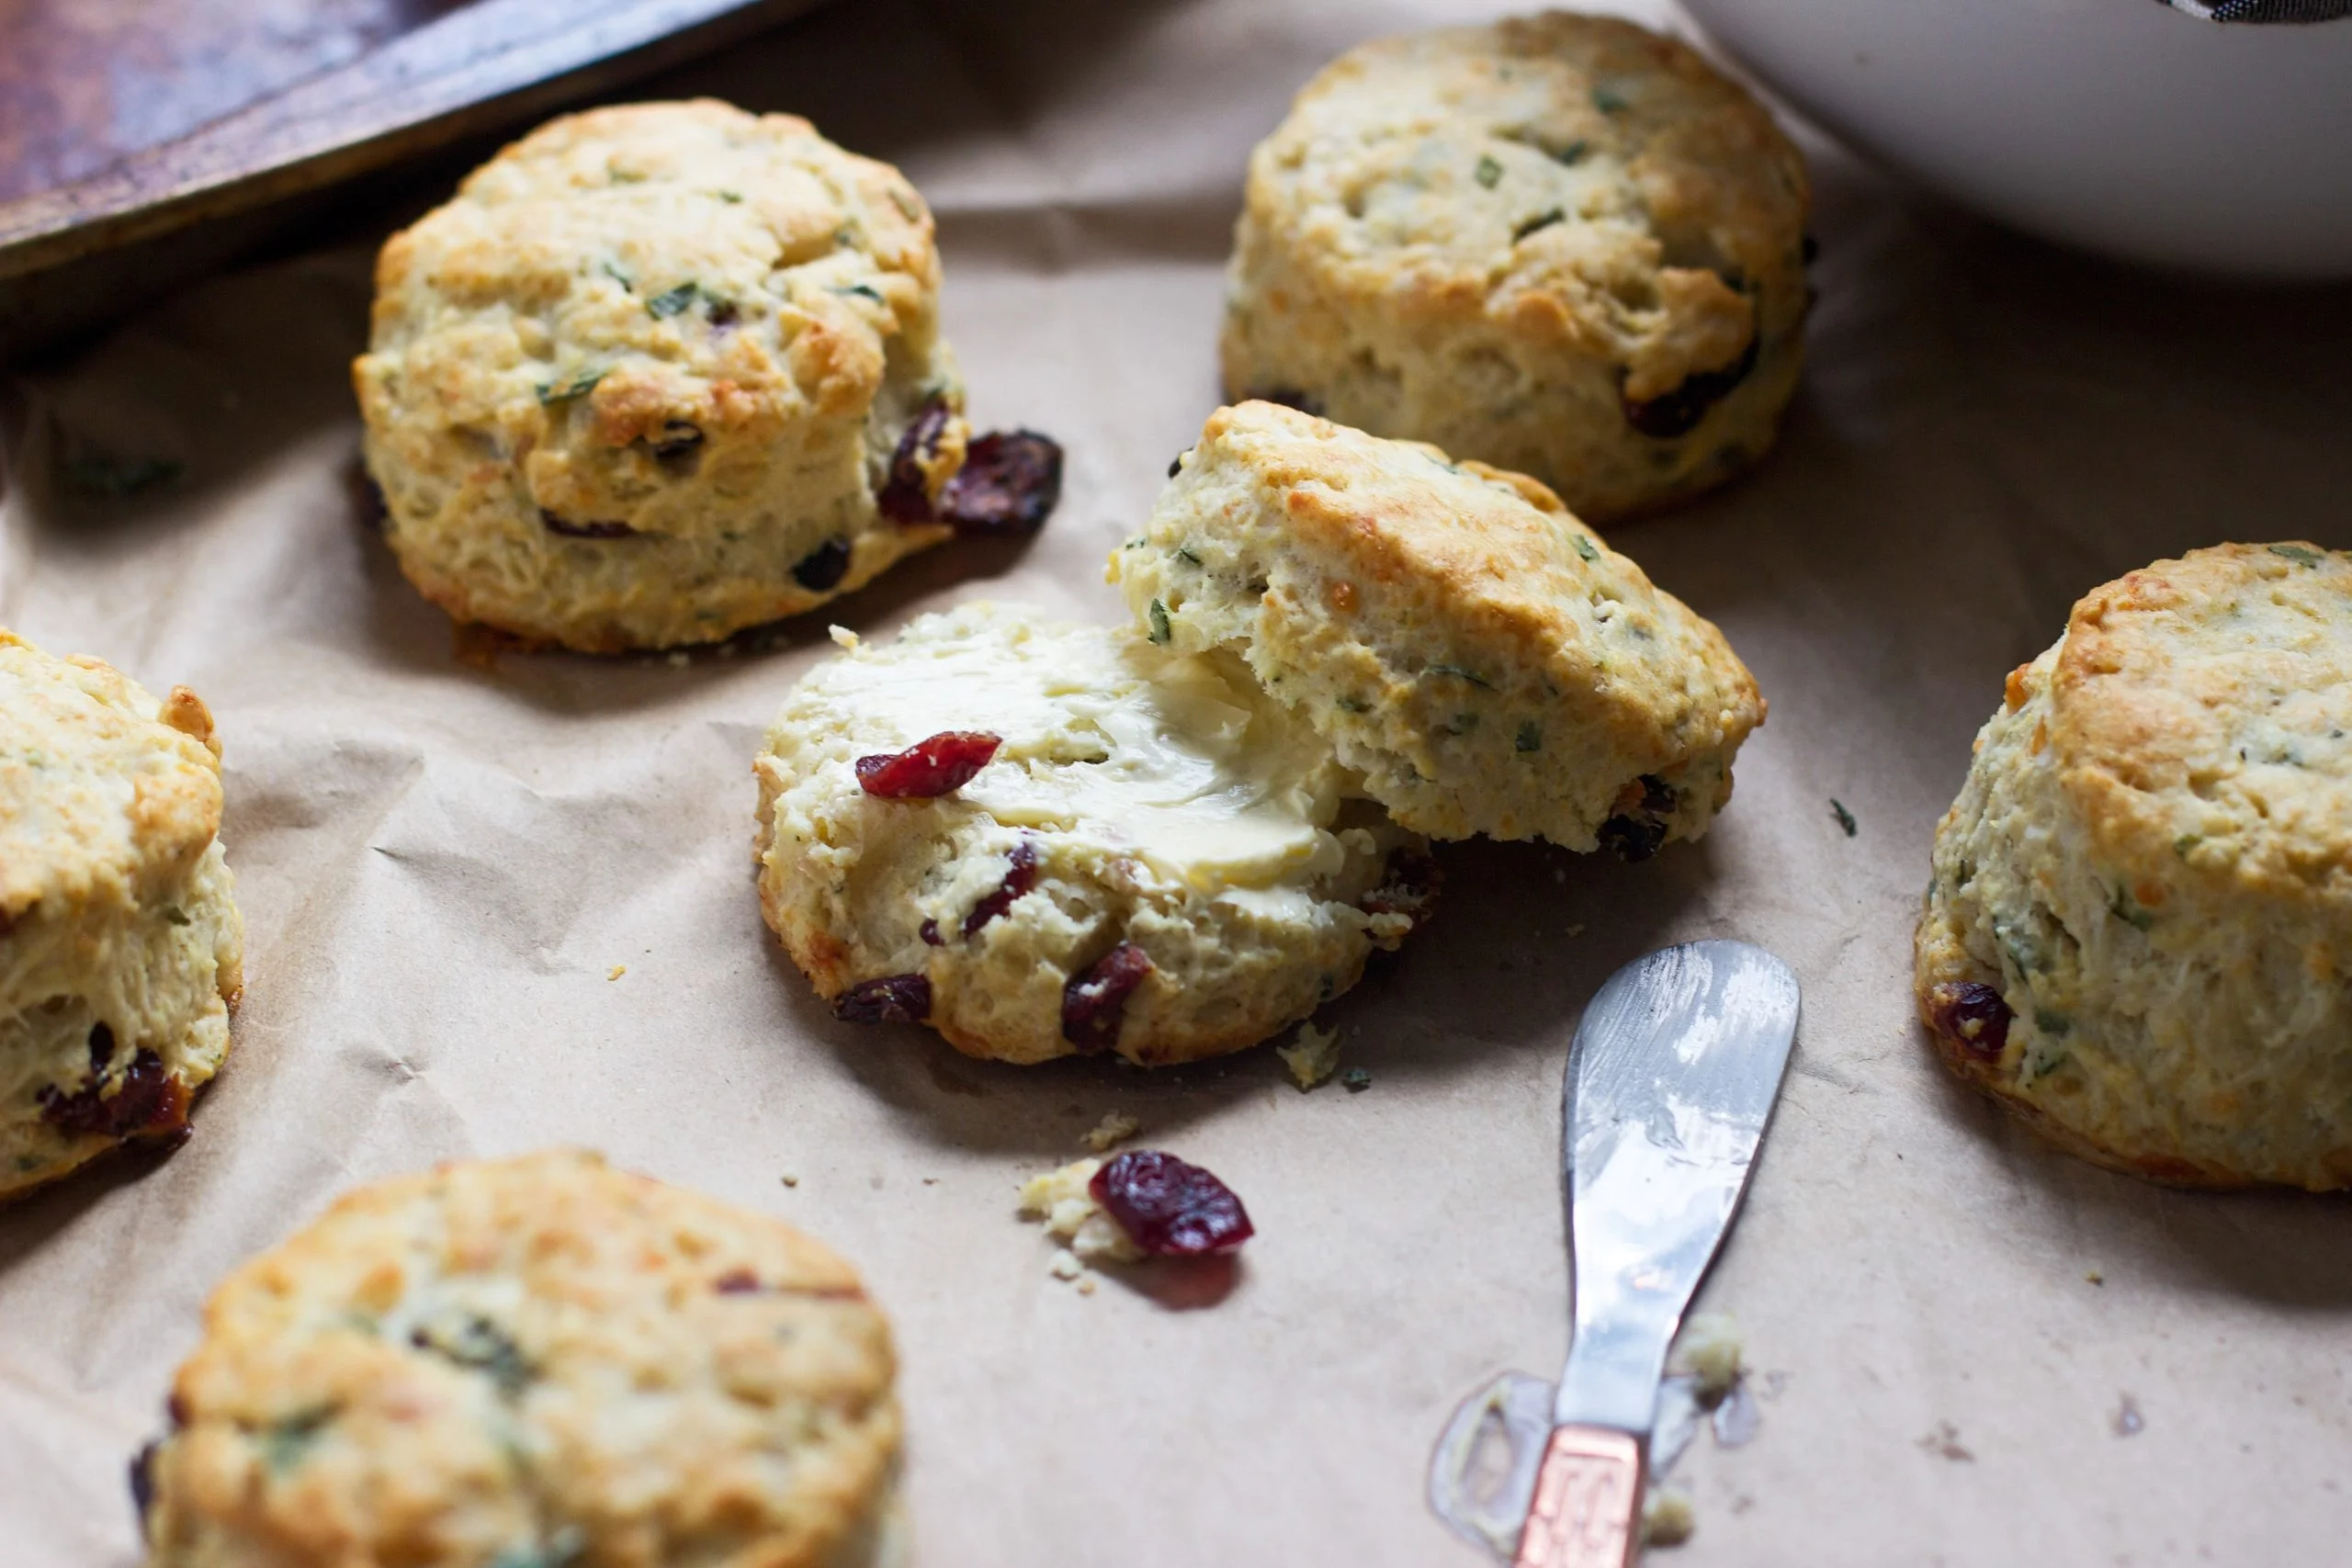 Super Easy Gruyere, Cranberry and Sage Buttermilk Biscuits - The perfect alternative to rolls on your holiday table! #inspiredgathering #spon